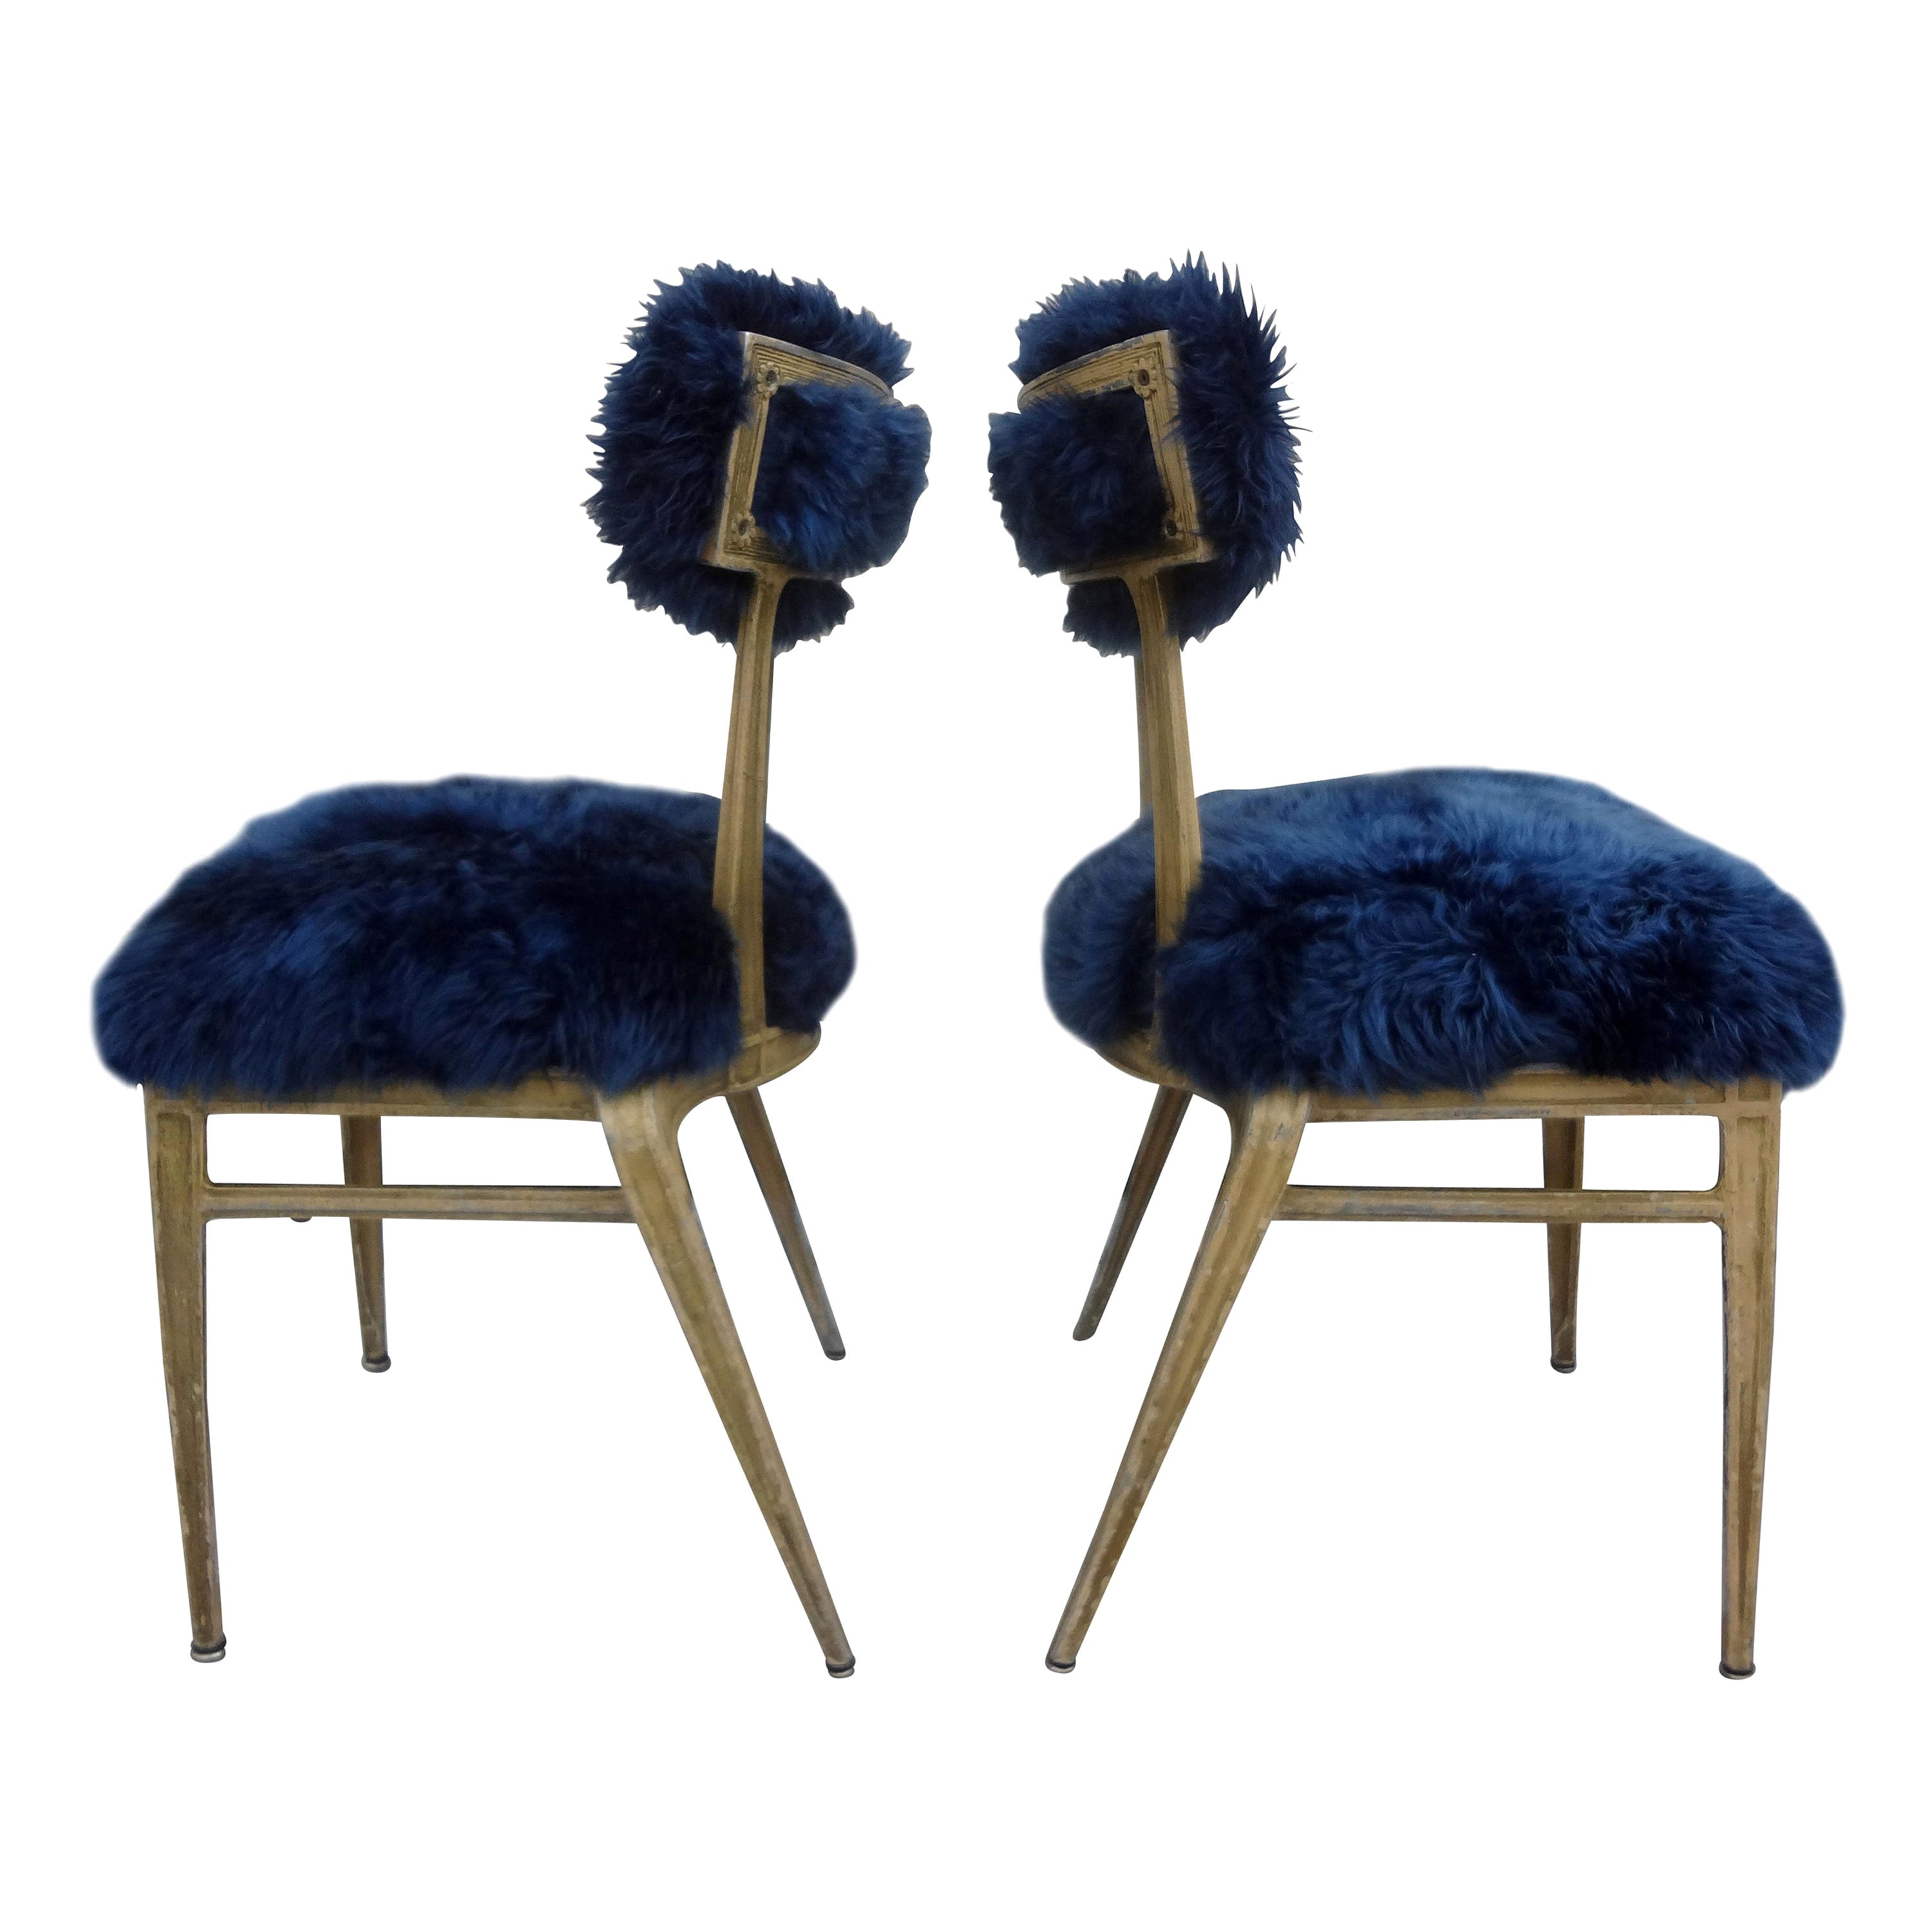 Pair of French Modern Jean Prouvé Style Metal Chairs Upholstered in Sheepskin